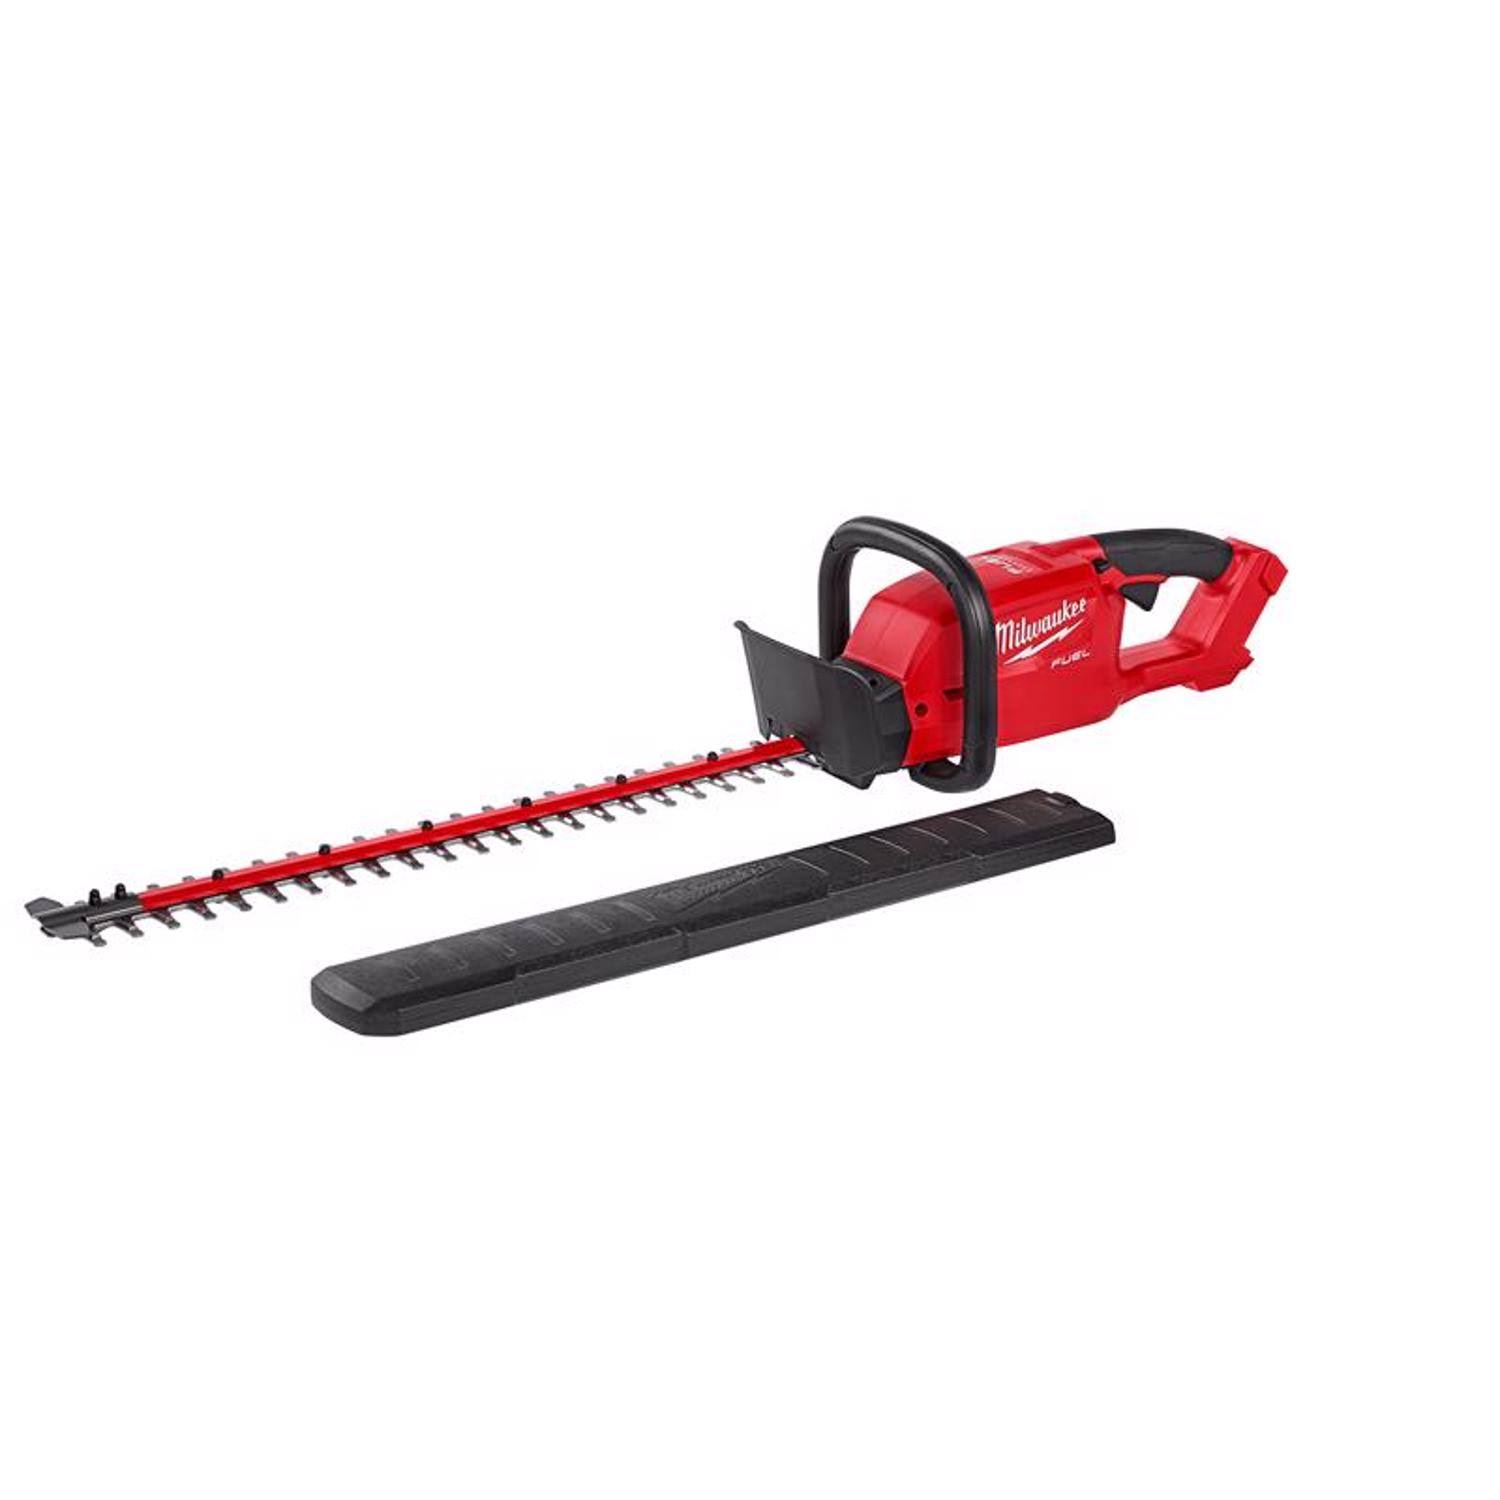 Milwaukee 3001-20 M18 Fuel 18-inch Hedge Trimmer, Tool Only